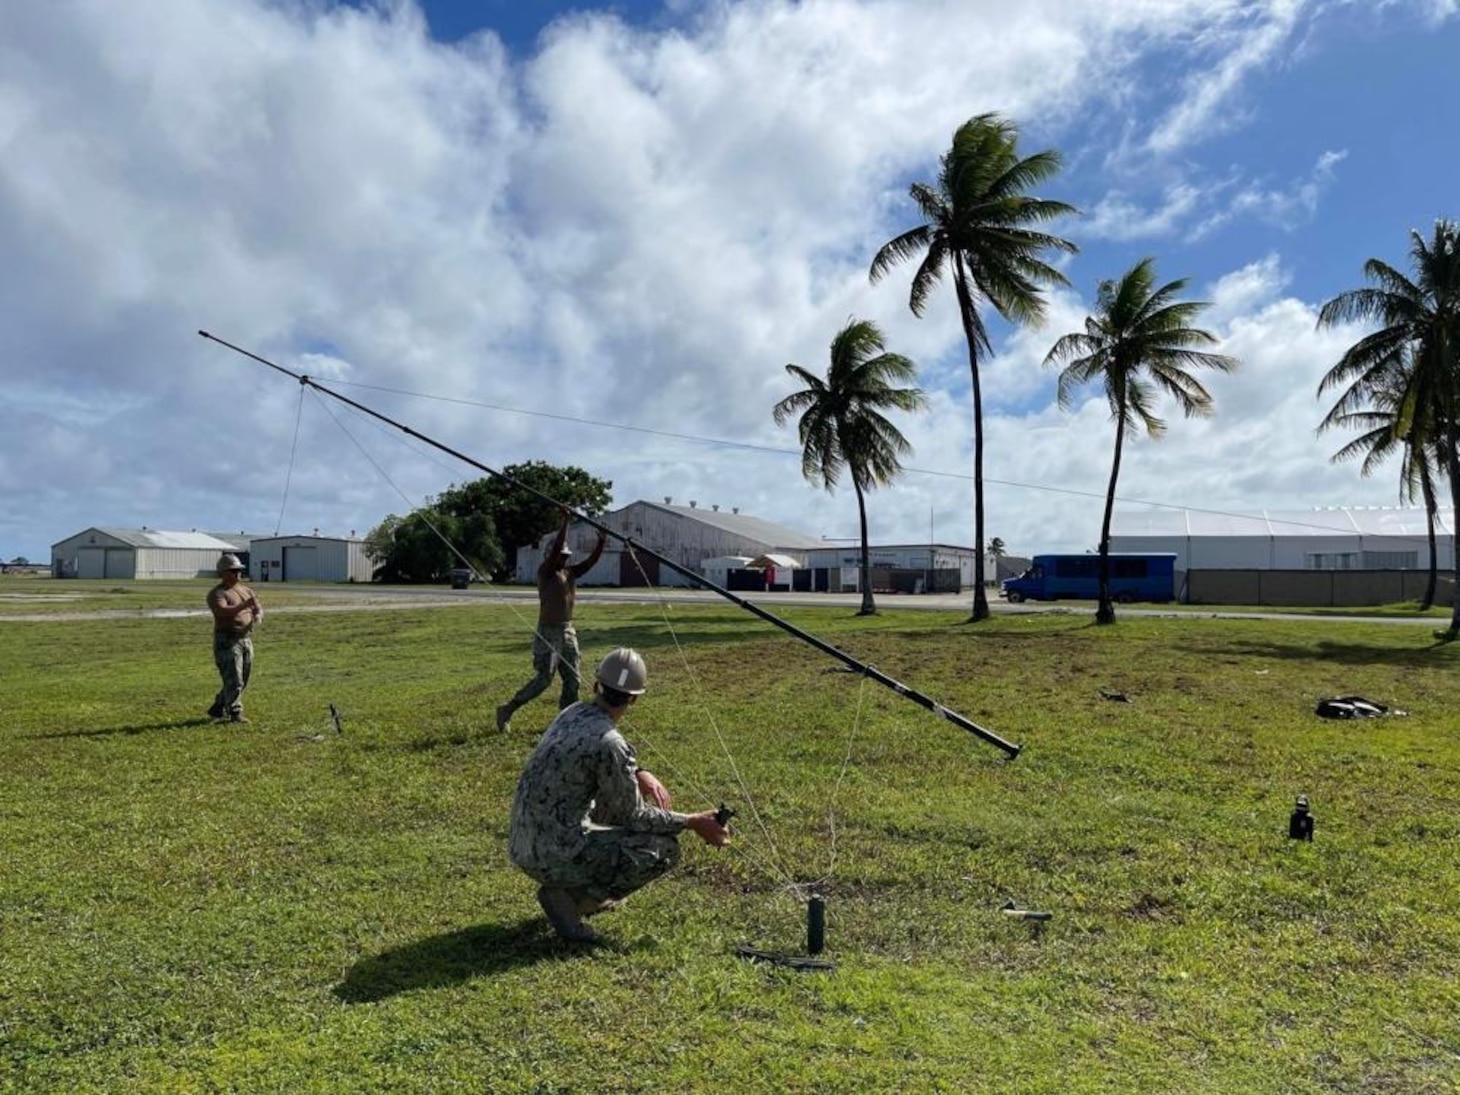 211122-N-CE120-1004 KWAJALEIN, Marshall Islands (Nov. 14, 2021) U.S. Navy Seabees with Naval Mobile Construction Battalion (NMCB) 5 set up an antenna during a joint Communications Exercise at Kwajalein, Marshall Islands. The U.S. Navy Seabees assigned to NMCB-5 are deployed to the U.S. 7th Fleet area of operations, supporting a free and open Indo-Pacific, strengthening their network of alliances and partnerships, and providing general engineering and civil support to joint operational forces. Homeported out of Port Hueneme, California, NMCB-5 has 13 detail sites deployed throughout the U.S. and Indo-Pacific area of operations. (U.S. Navy photo by Equipment Operator 2nd Class Brandon Blevins)